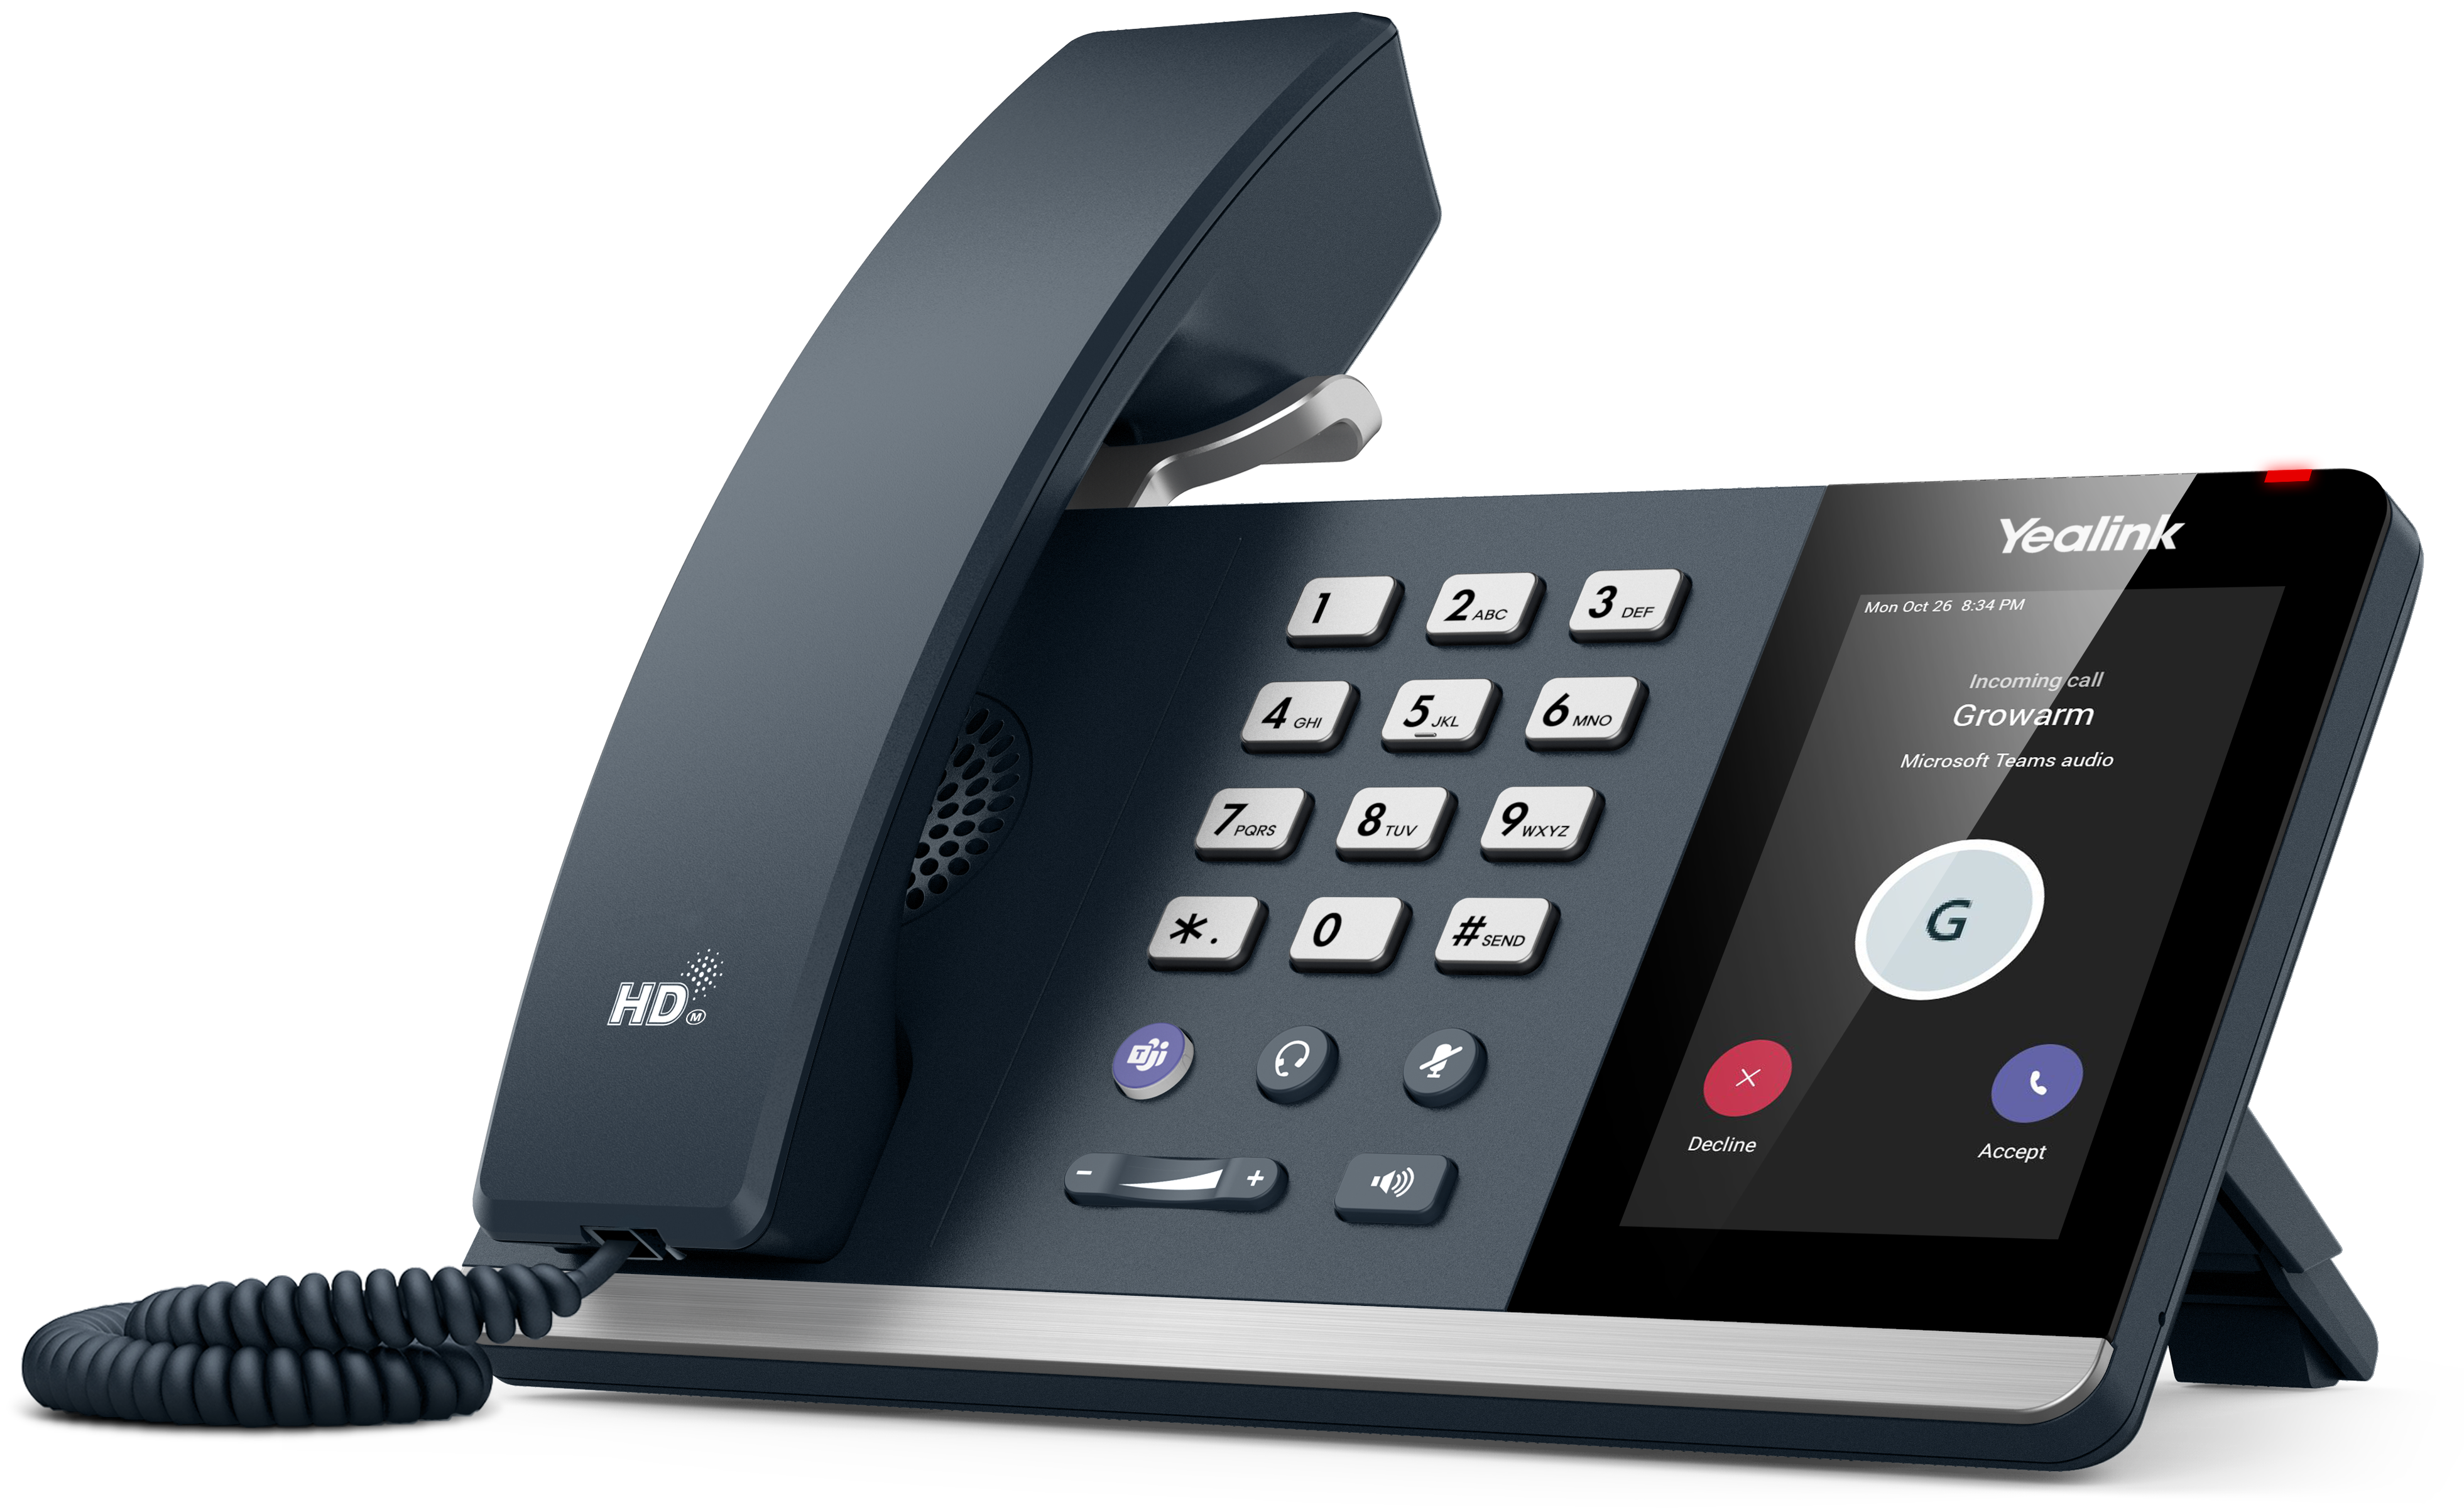 Yealink MP50 Teams USB Phone (1 Year Manufacture Local Warranty In Singapore) (Pre-Order Lead Time 1-2 Weeks)